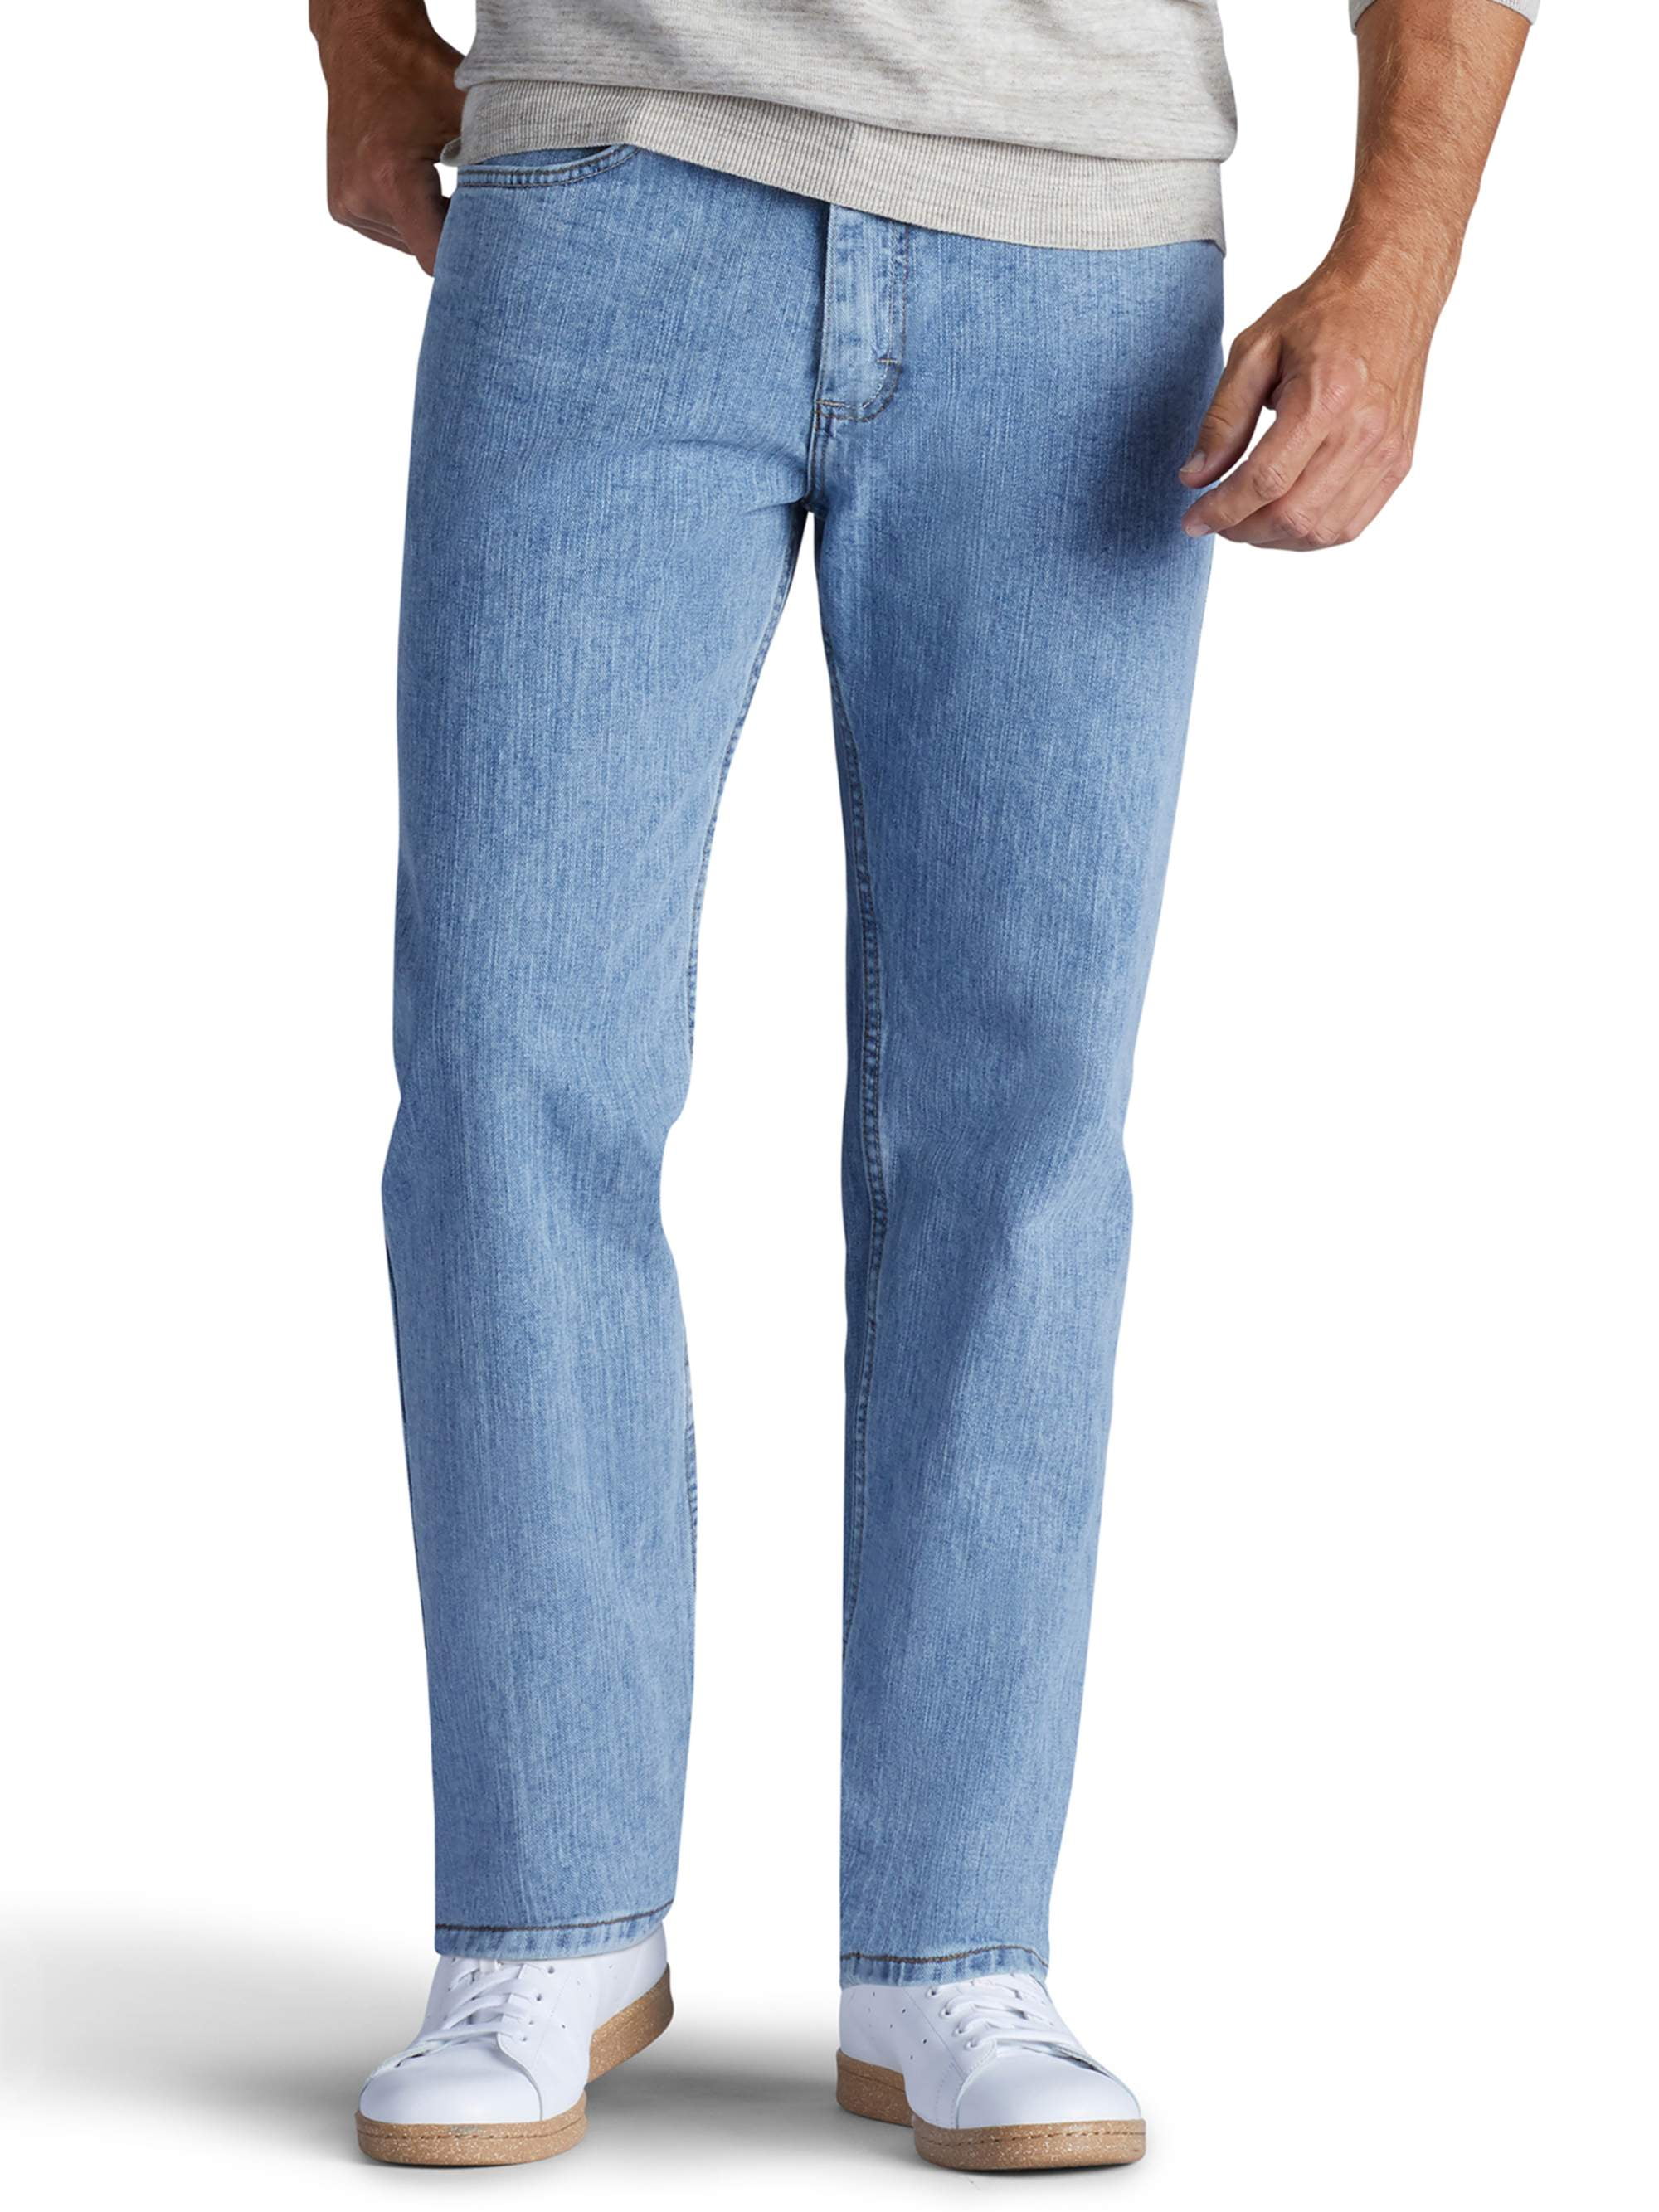 relaxed fit jeans walmart